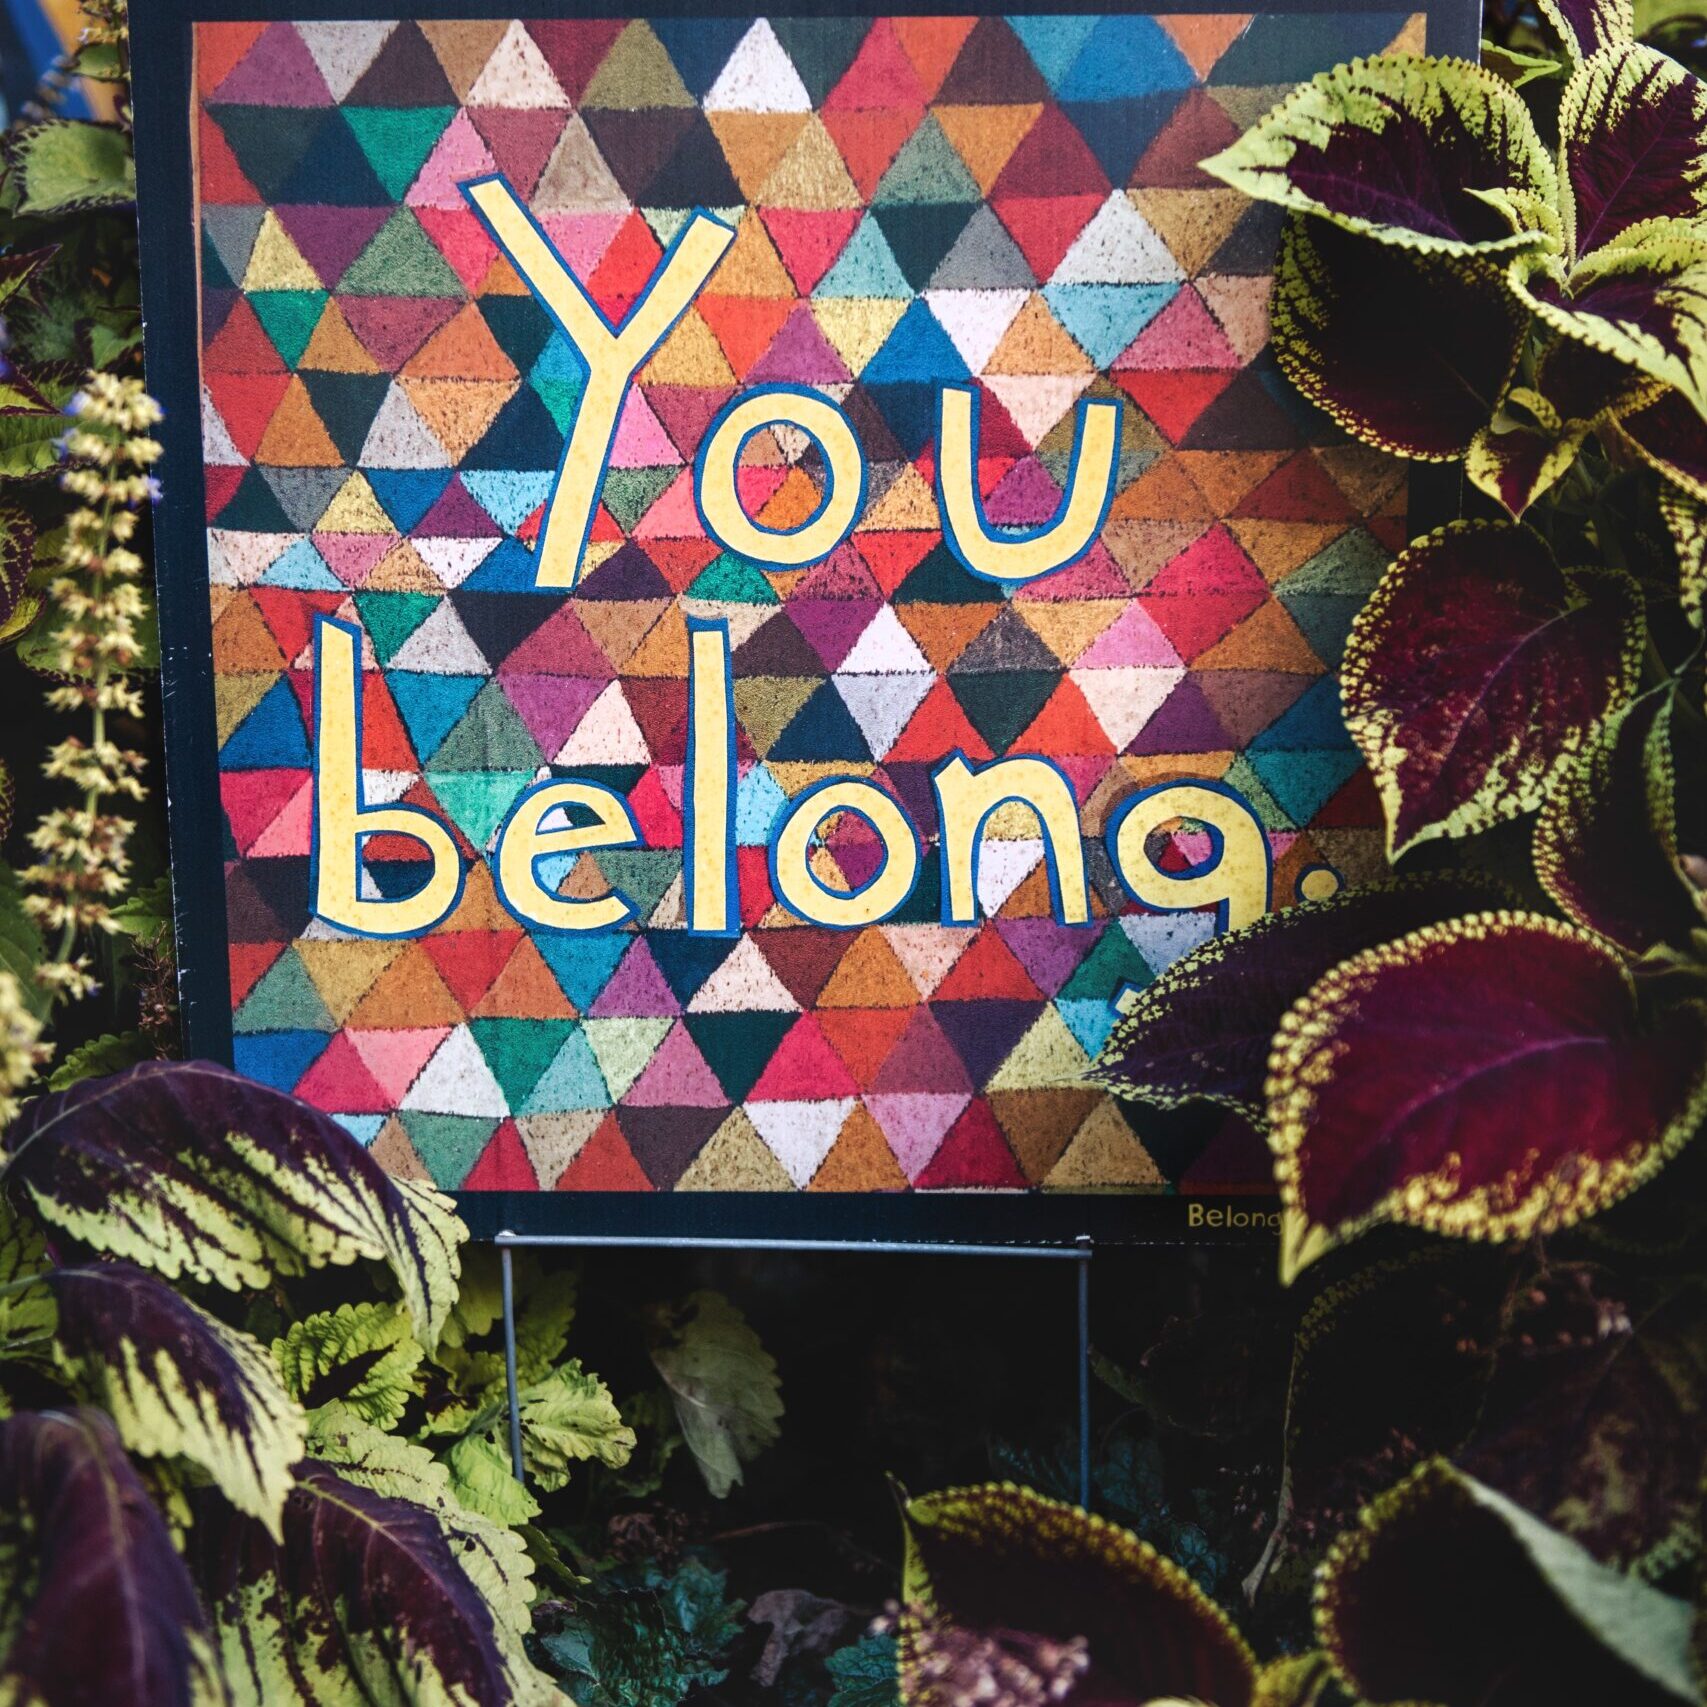 Colorful sign surrounded by plants, the words "You Belong" in yellow.